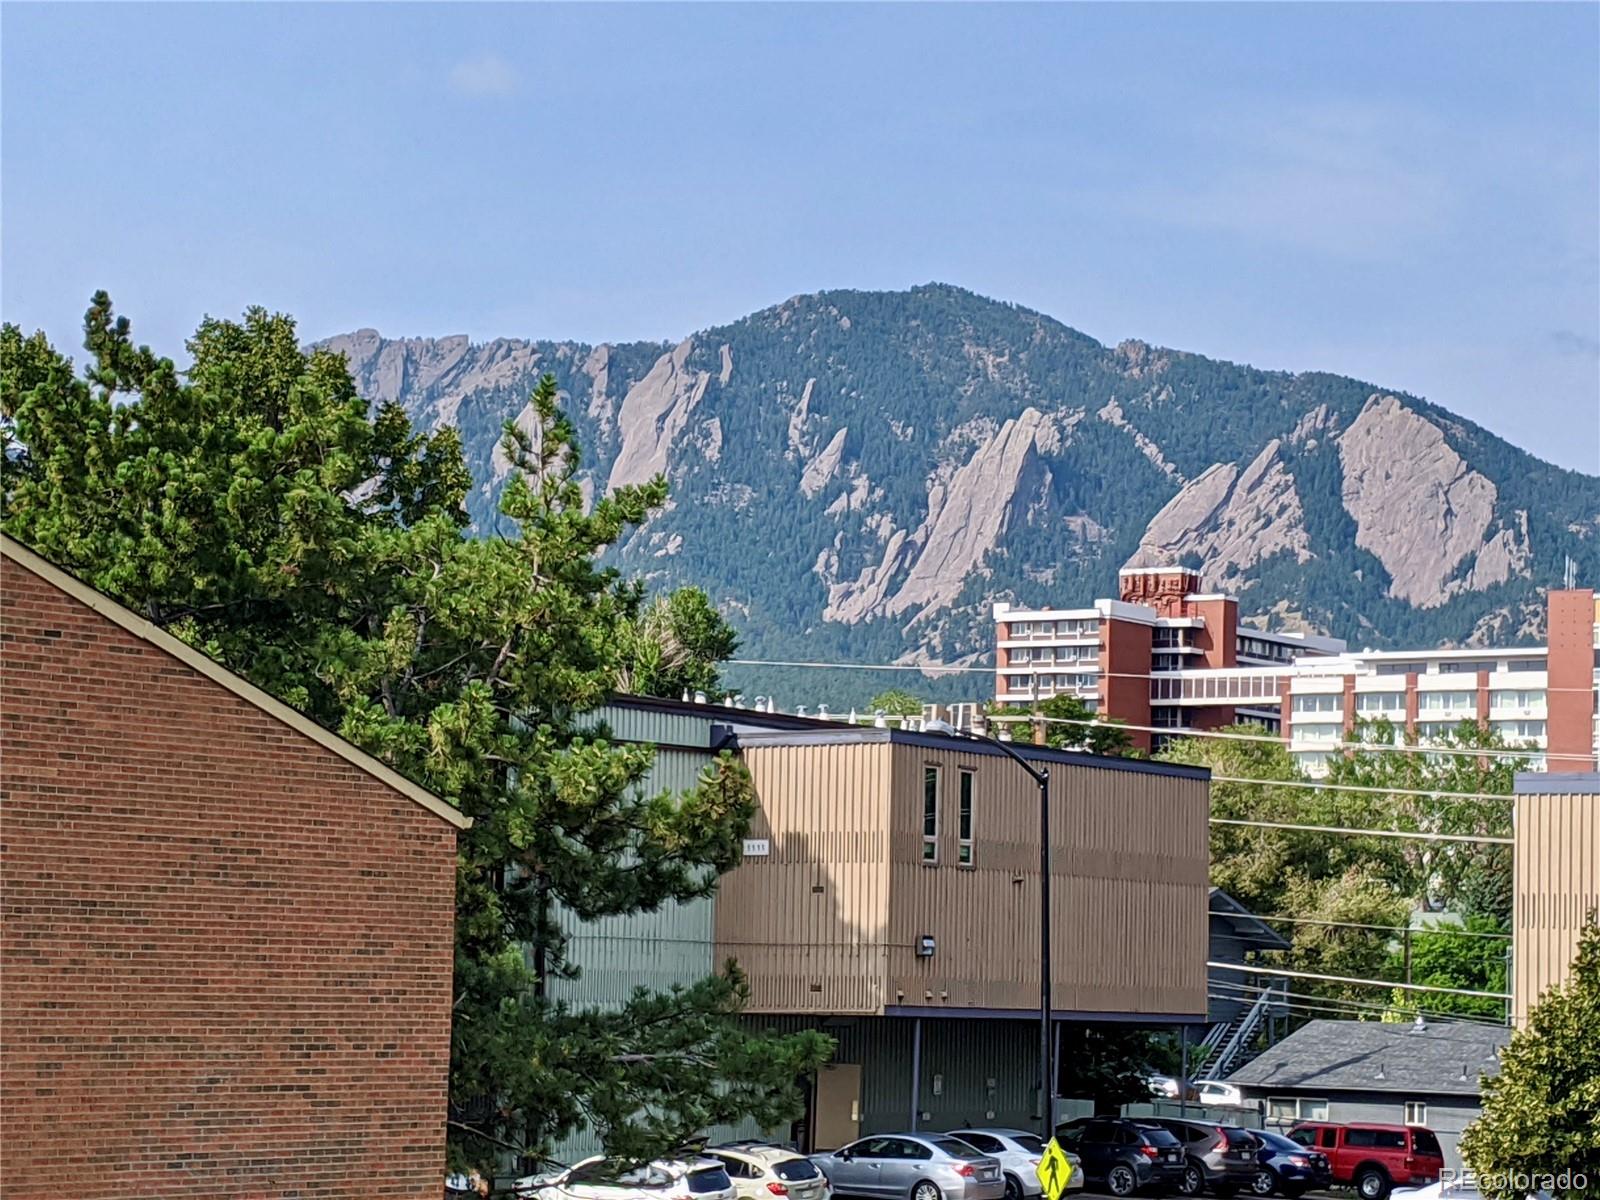 Close-up View of the Flatirons from Window